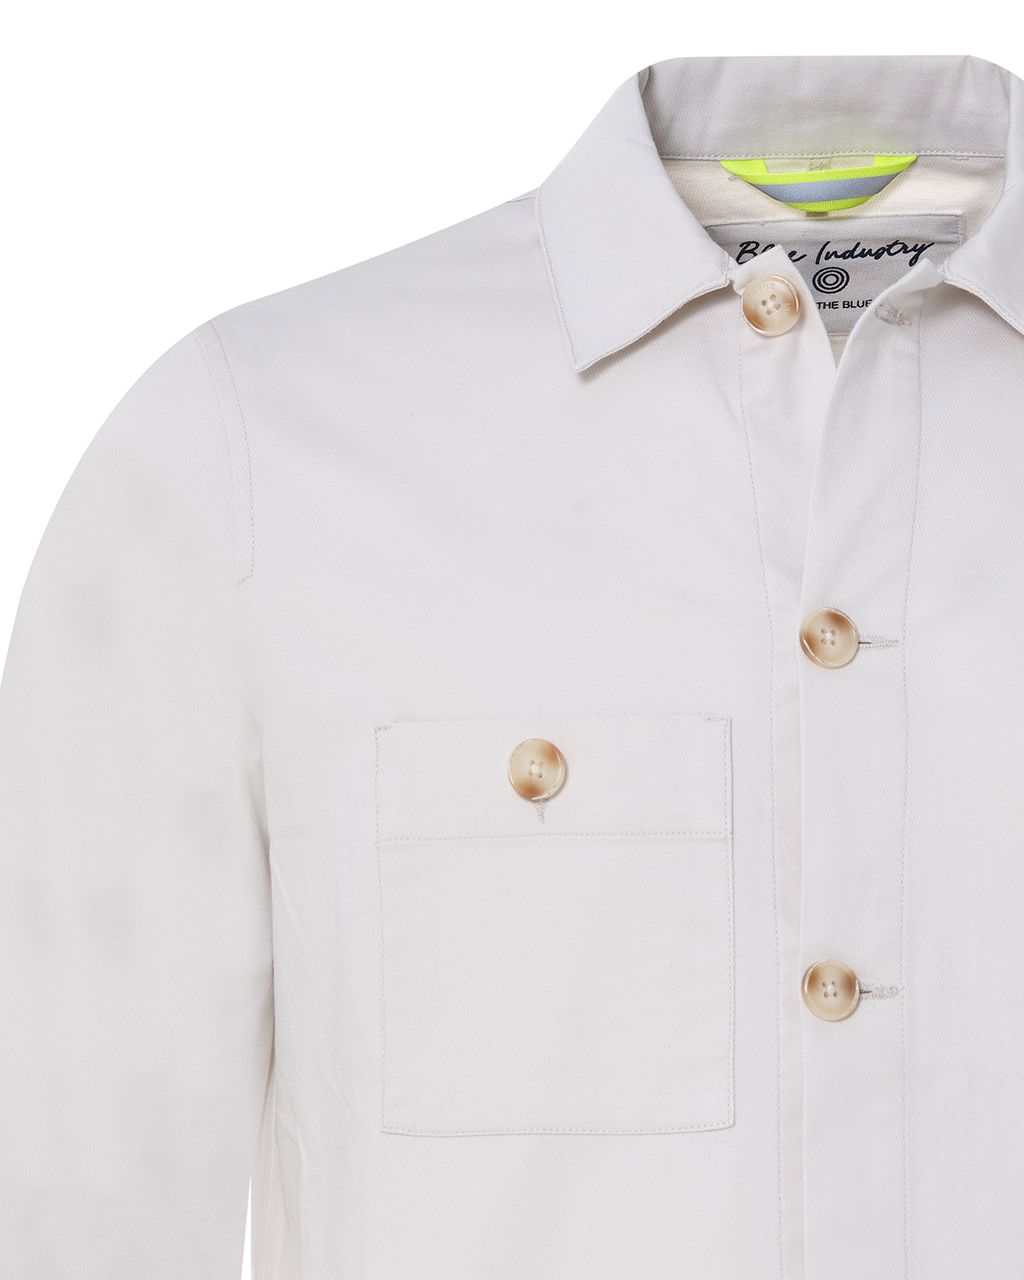 Blue Industry Overshirt Off white 078352-001-L